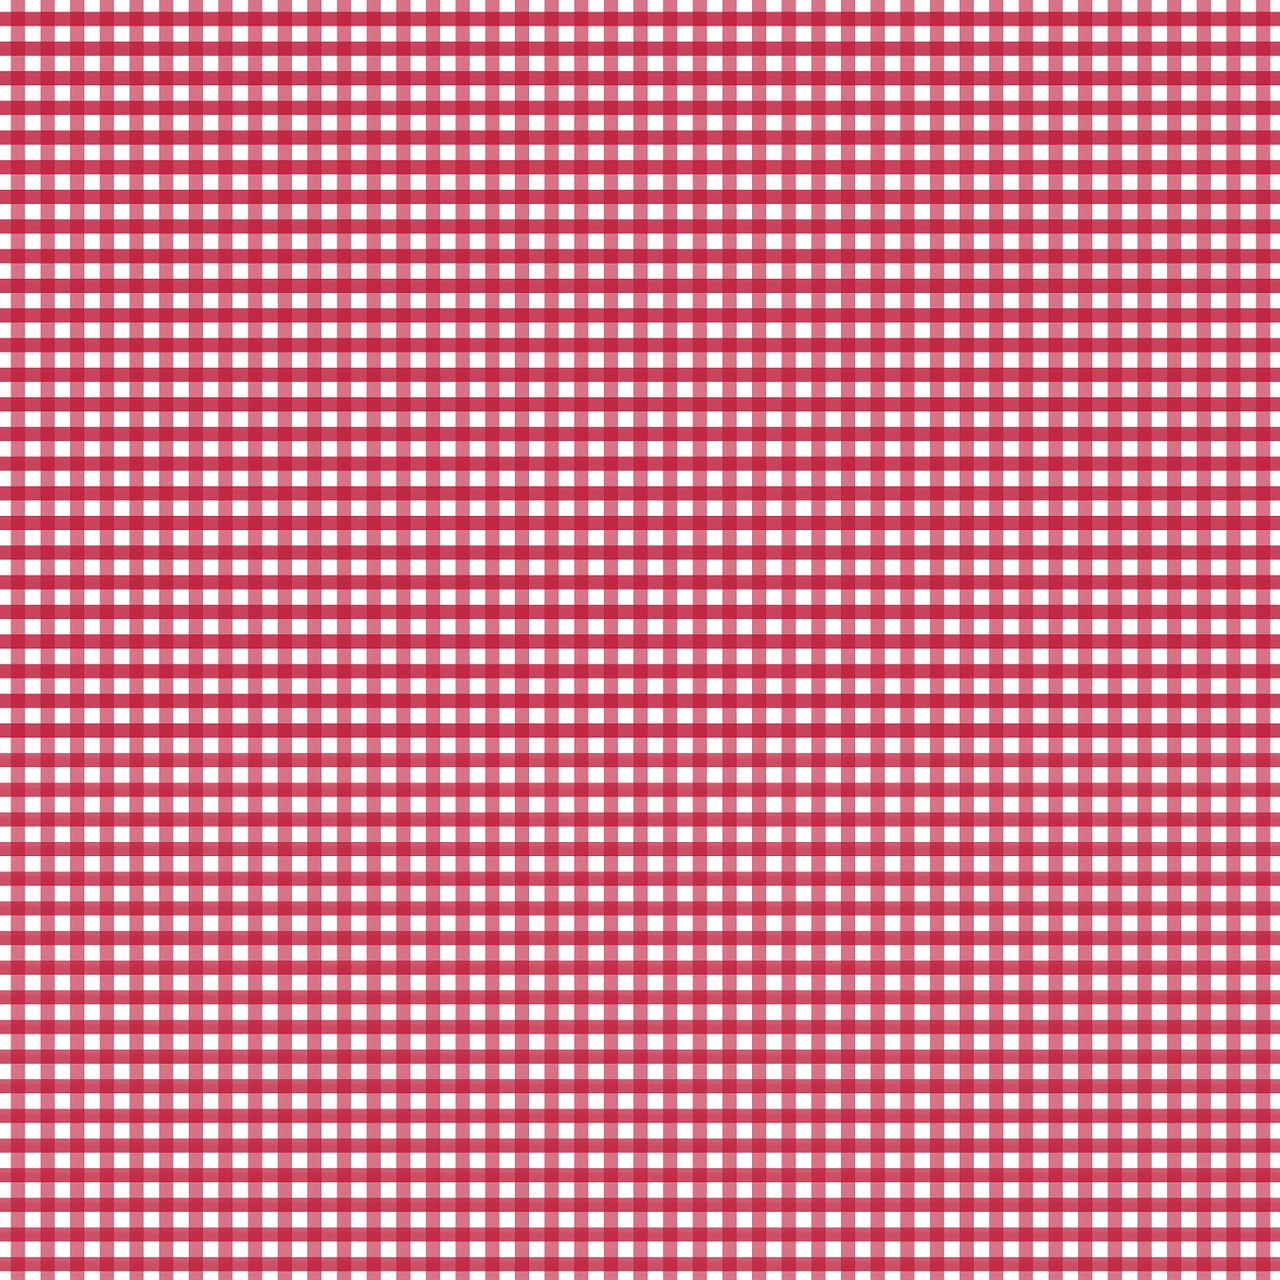 firebrick gingham pattern. textured red and white plaid background